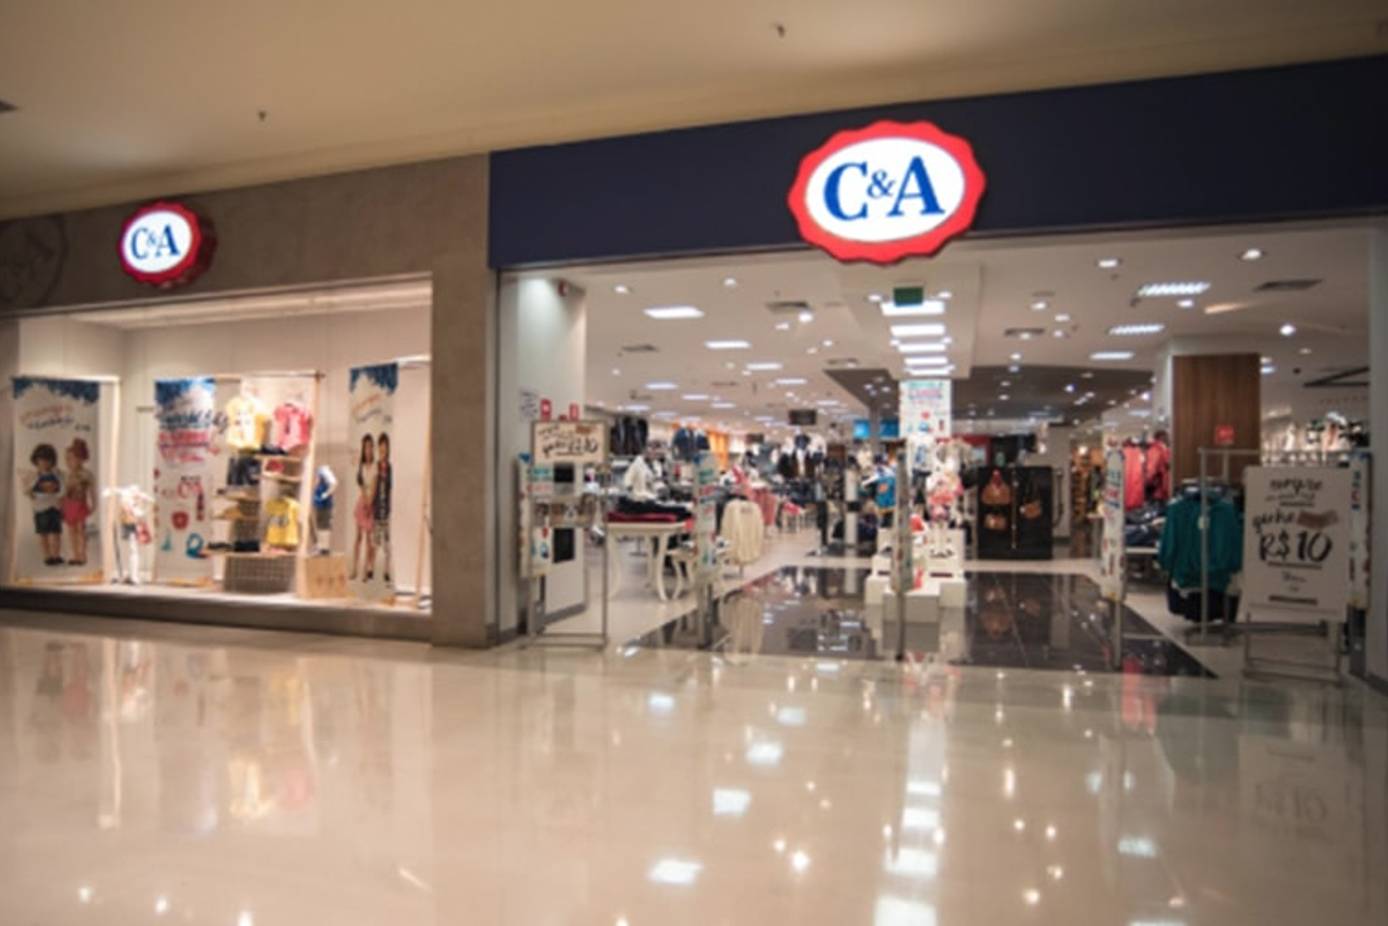 C&A Launches New Collection With Recover™ to Bring High-quality